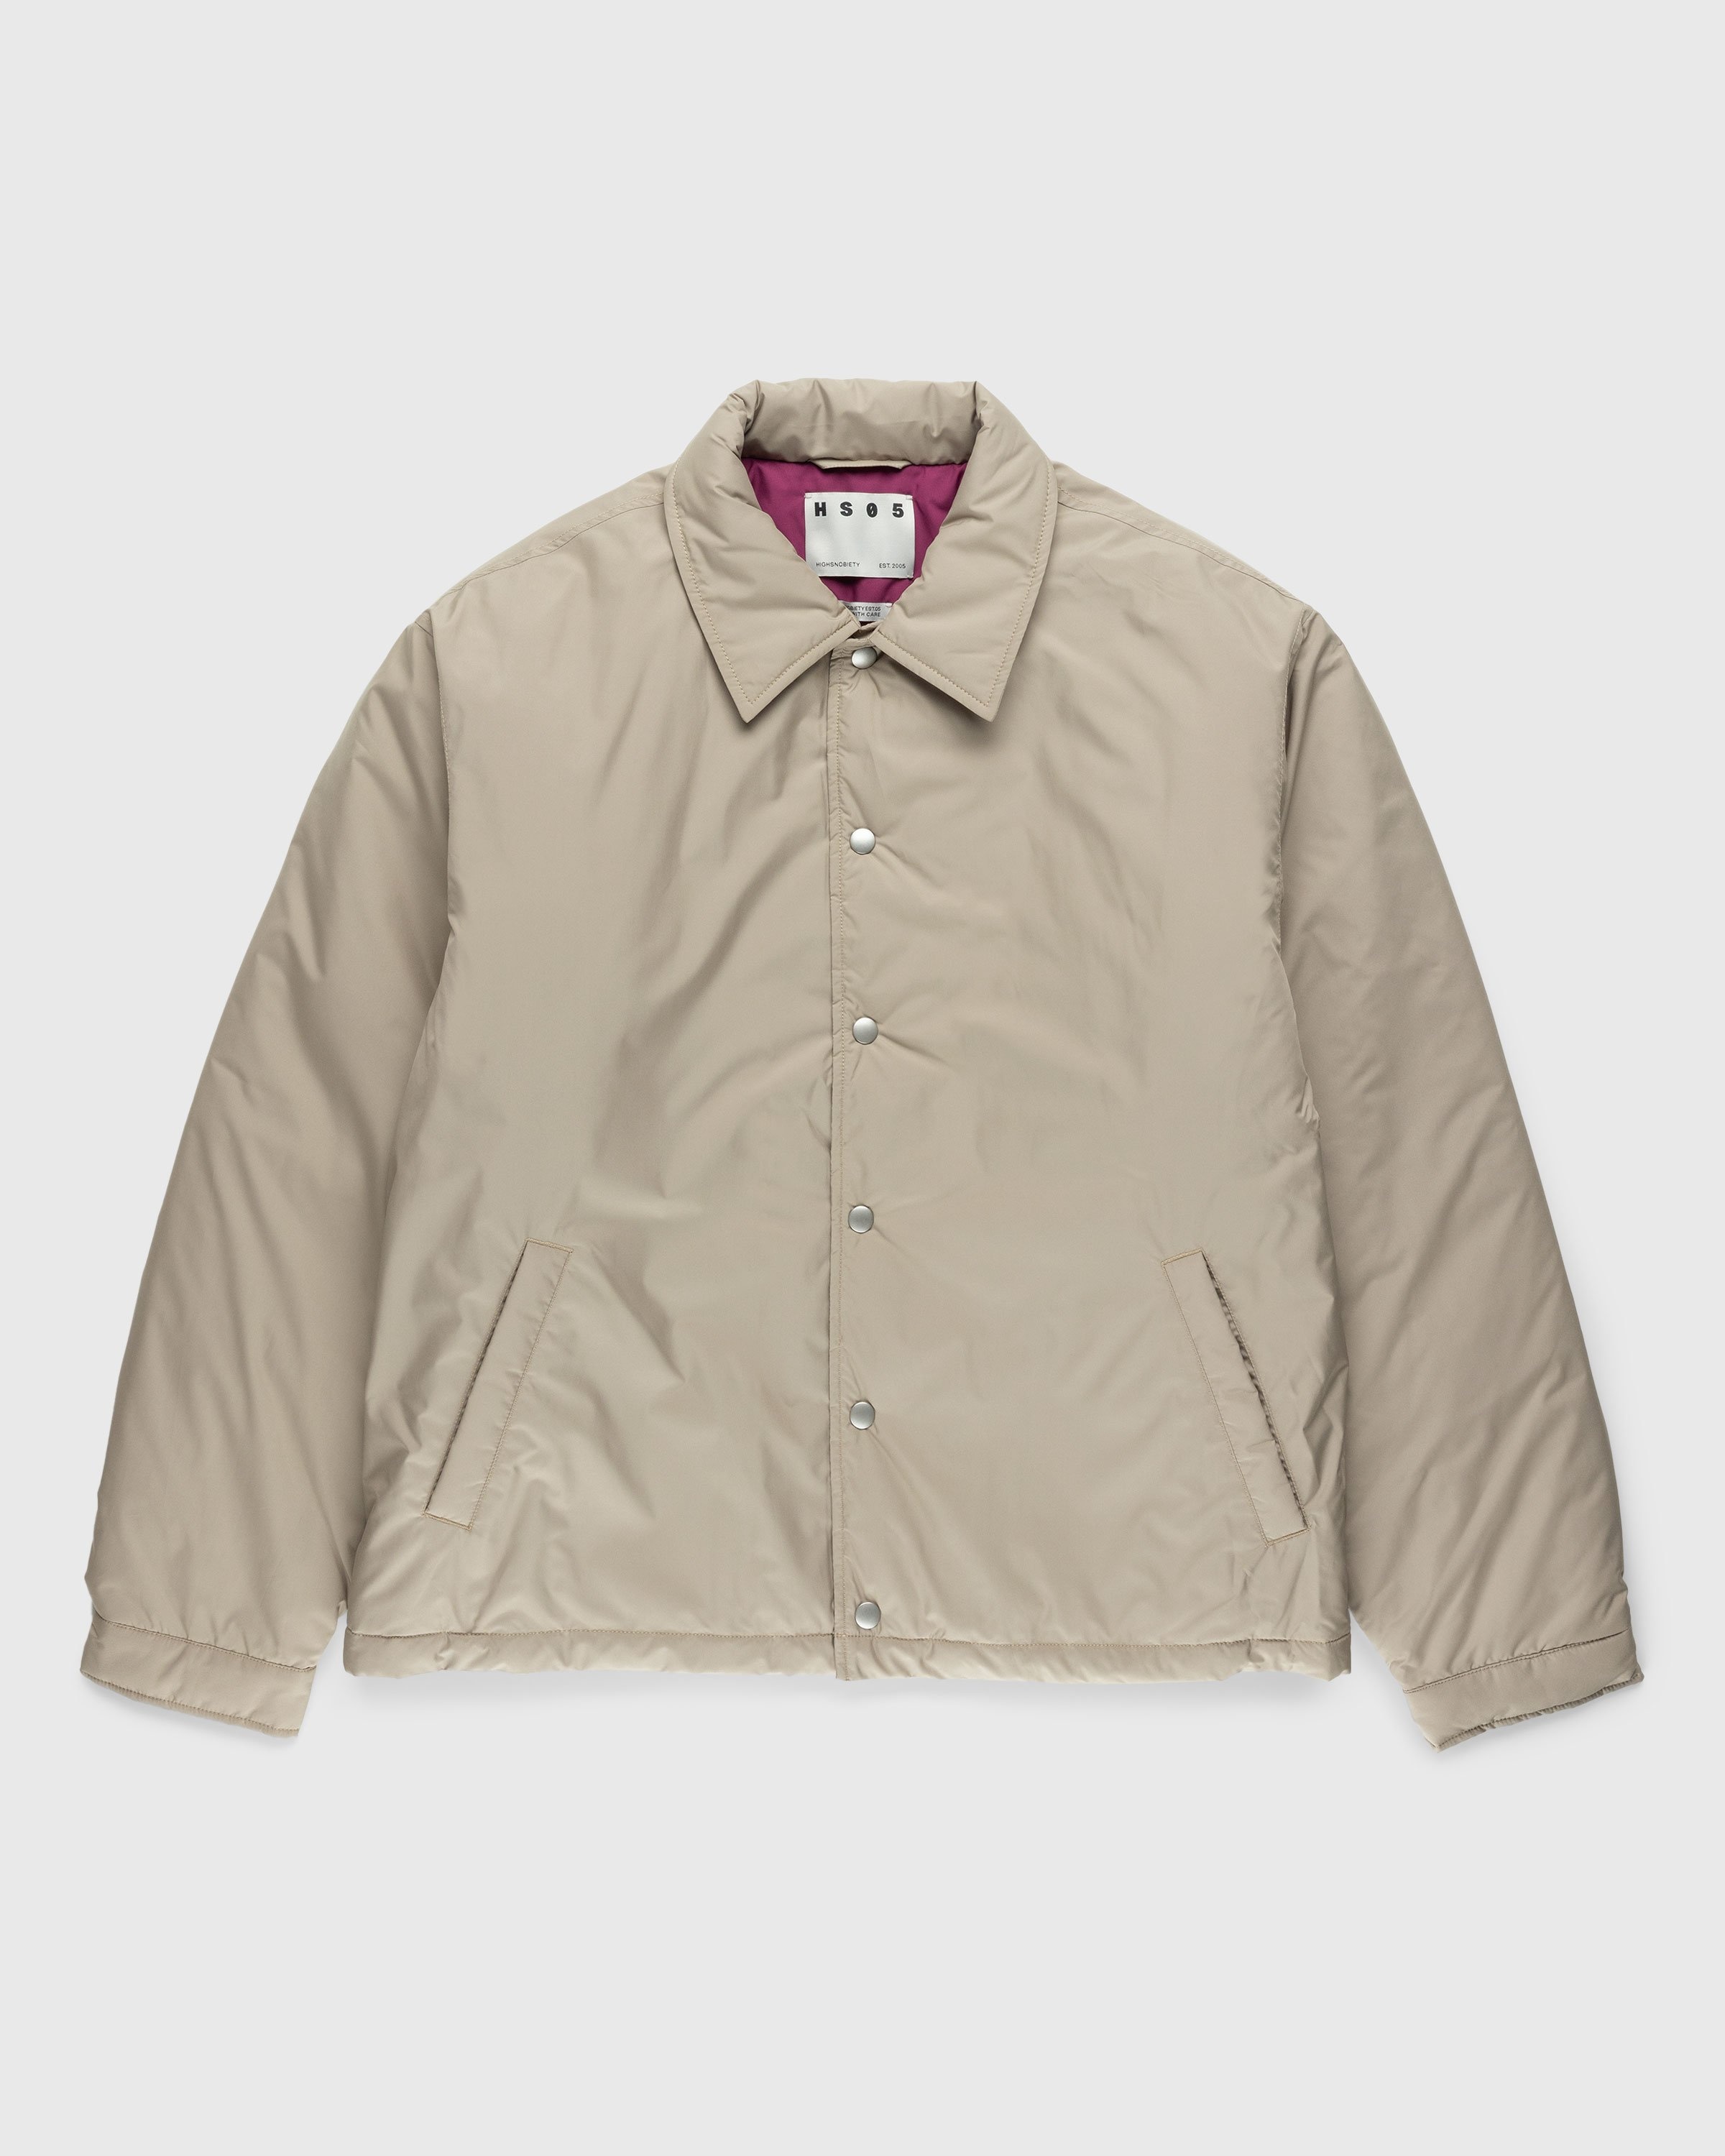 Highsnobiety HS05 – Light Insulated Eco-Poly Jacket Beige - Outerwear - Beige - Image 1